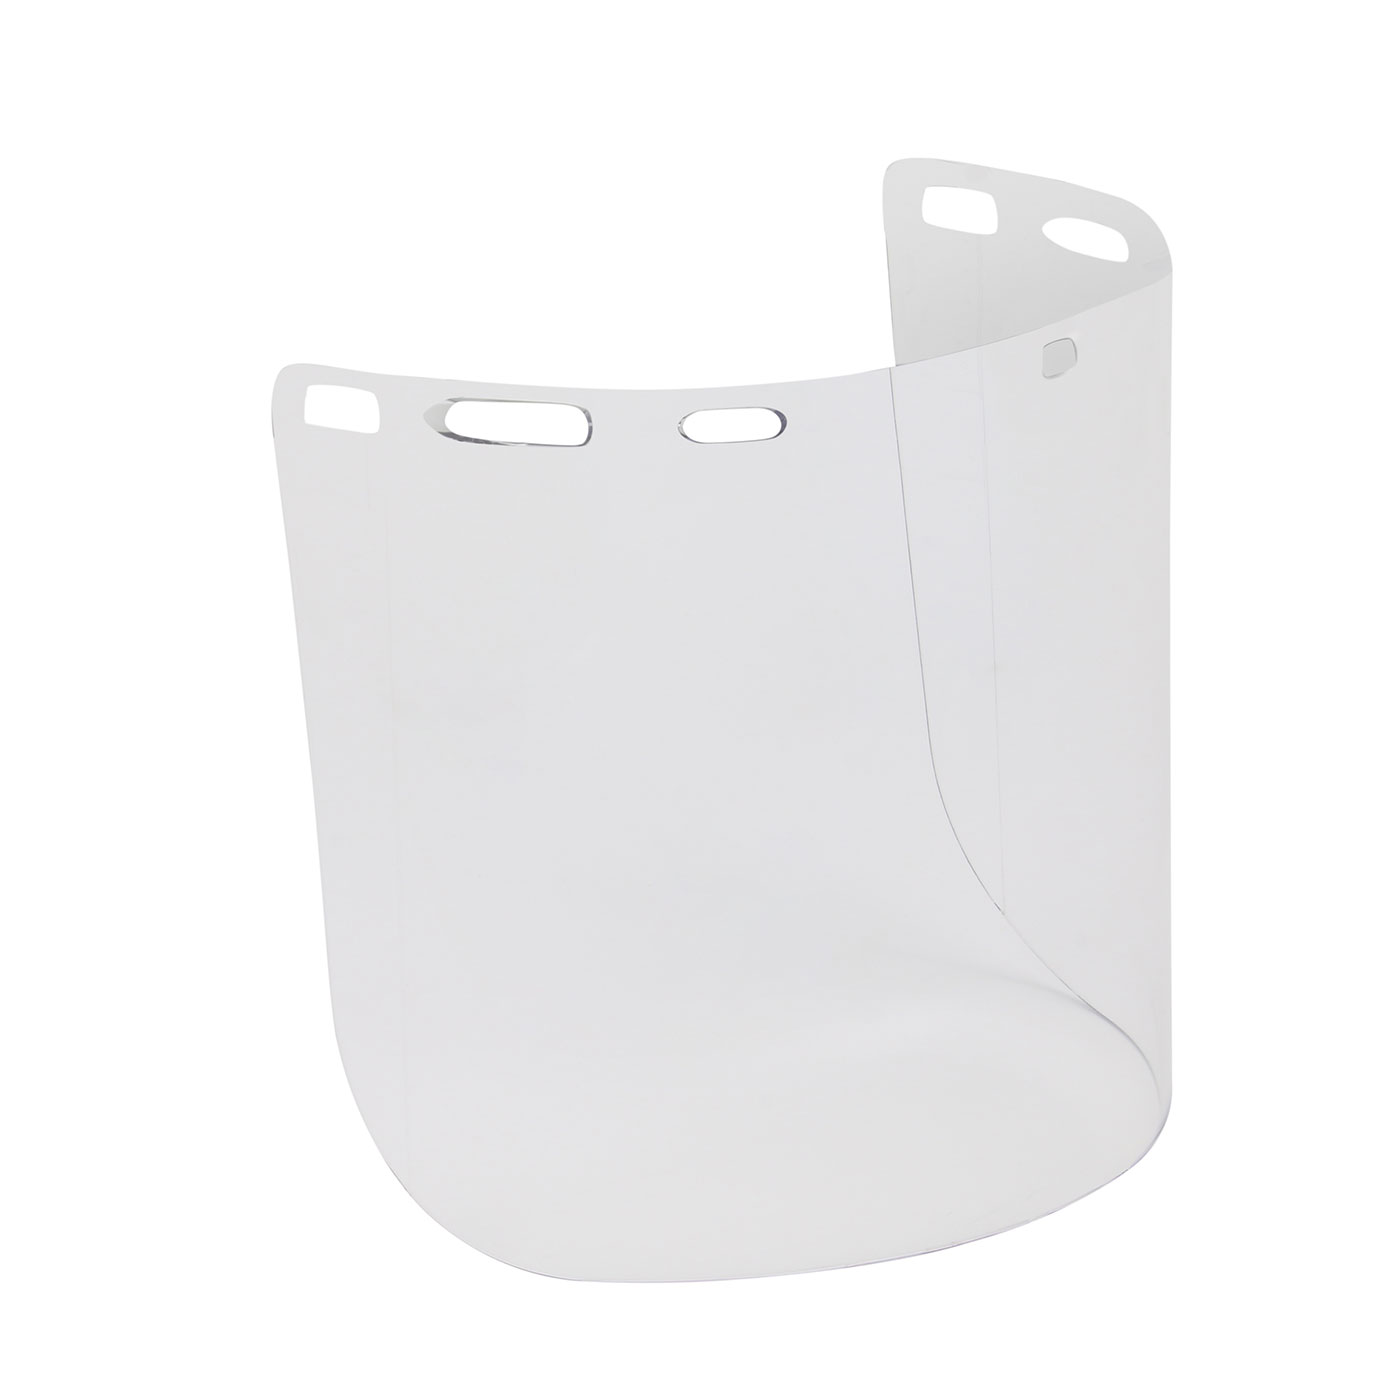 UNCOATED POLYCARBONATE SAFETY VISOR - CLEAR